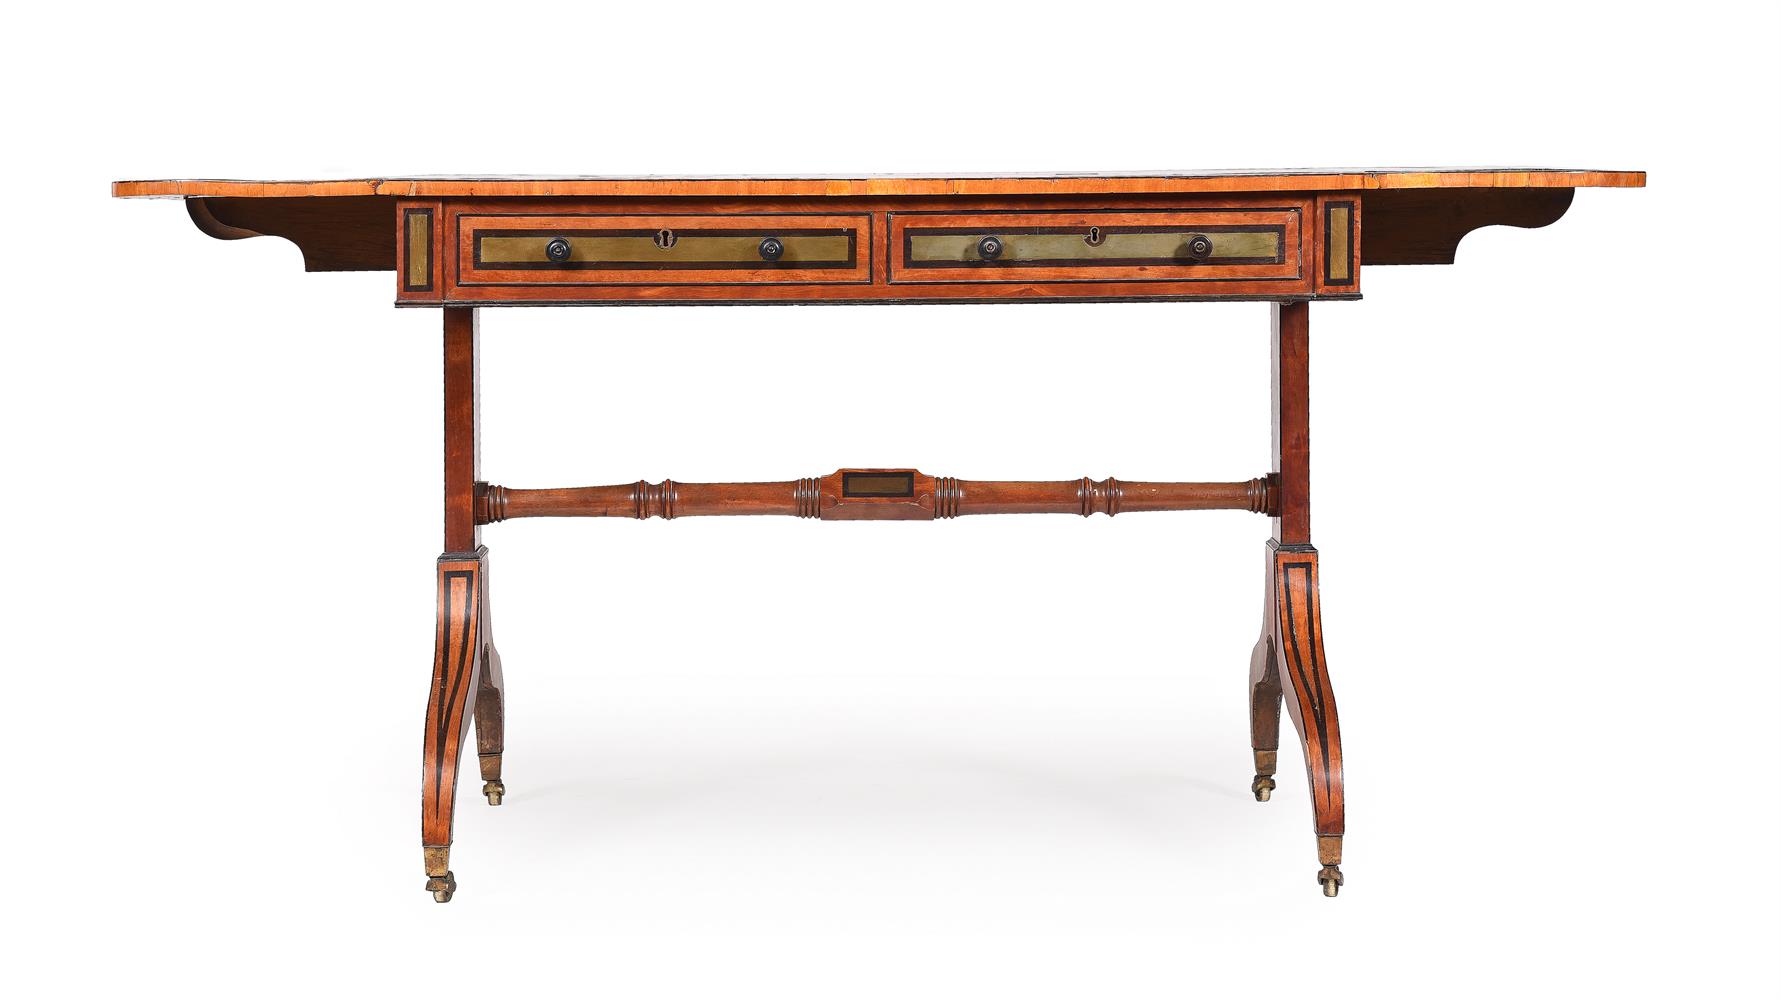 Y A REGENCY SATINWOOD, EBONY AND BRASS INLAID SOFA TABLE, CIRCA 1815 - Image 5 of 7